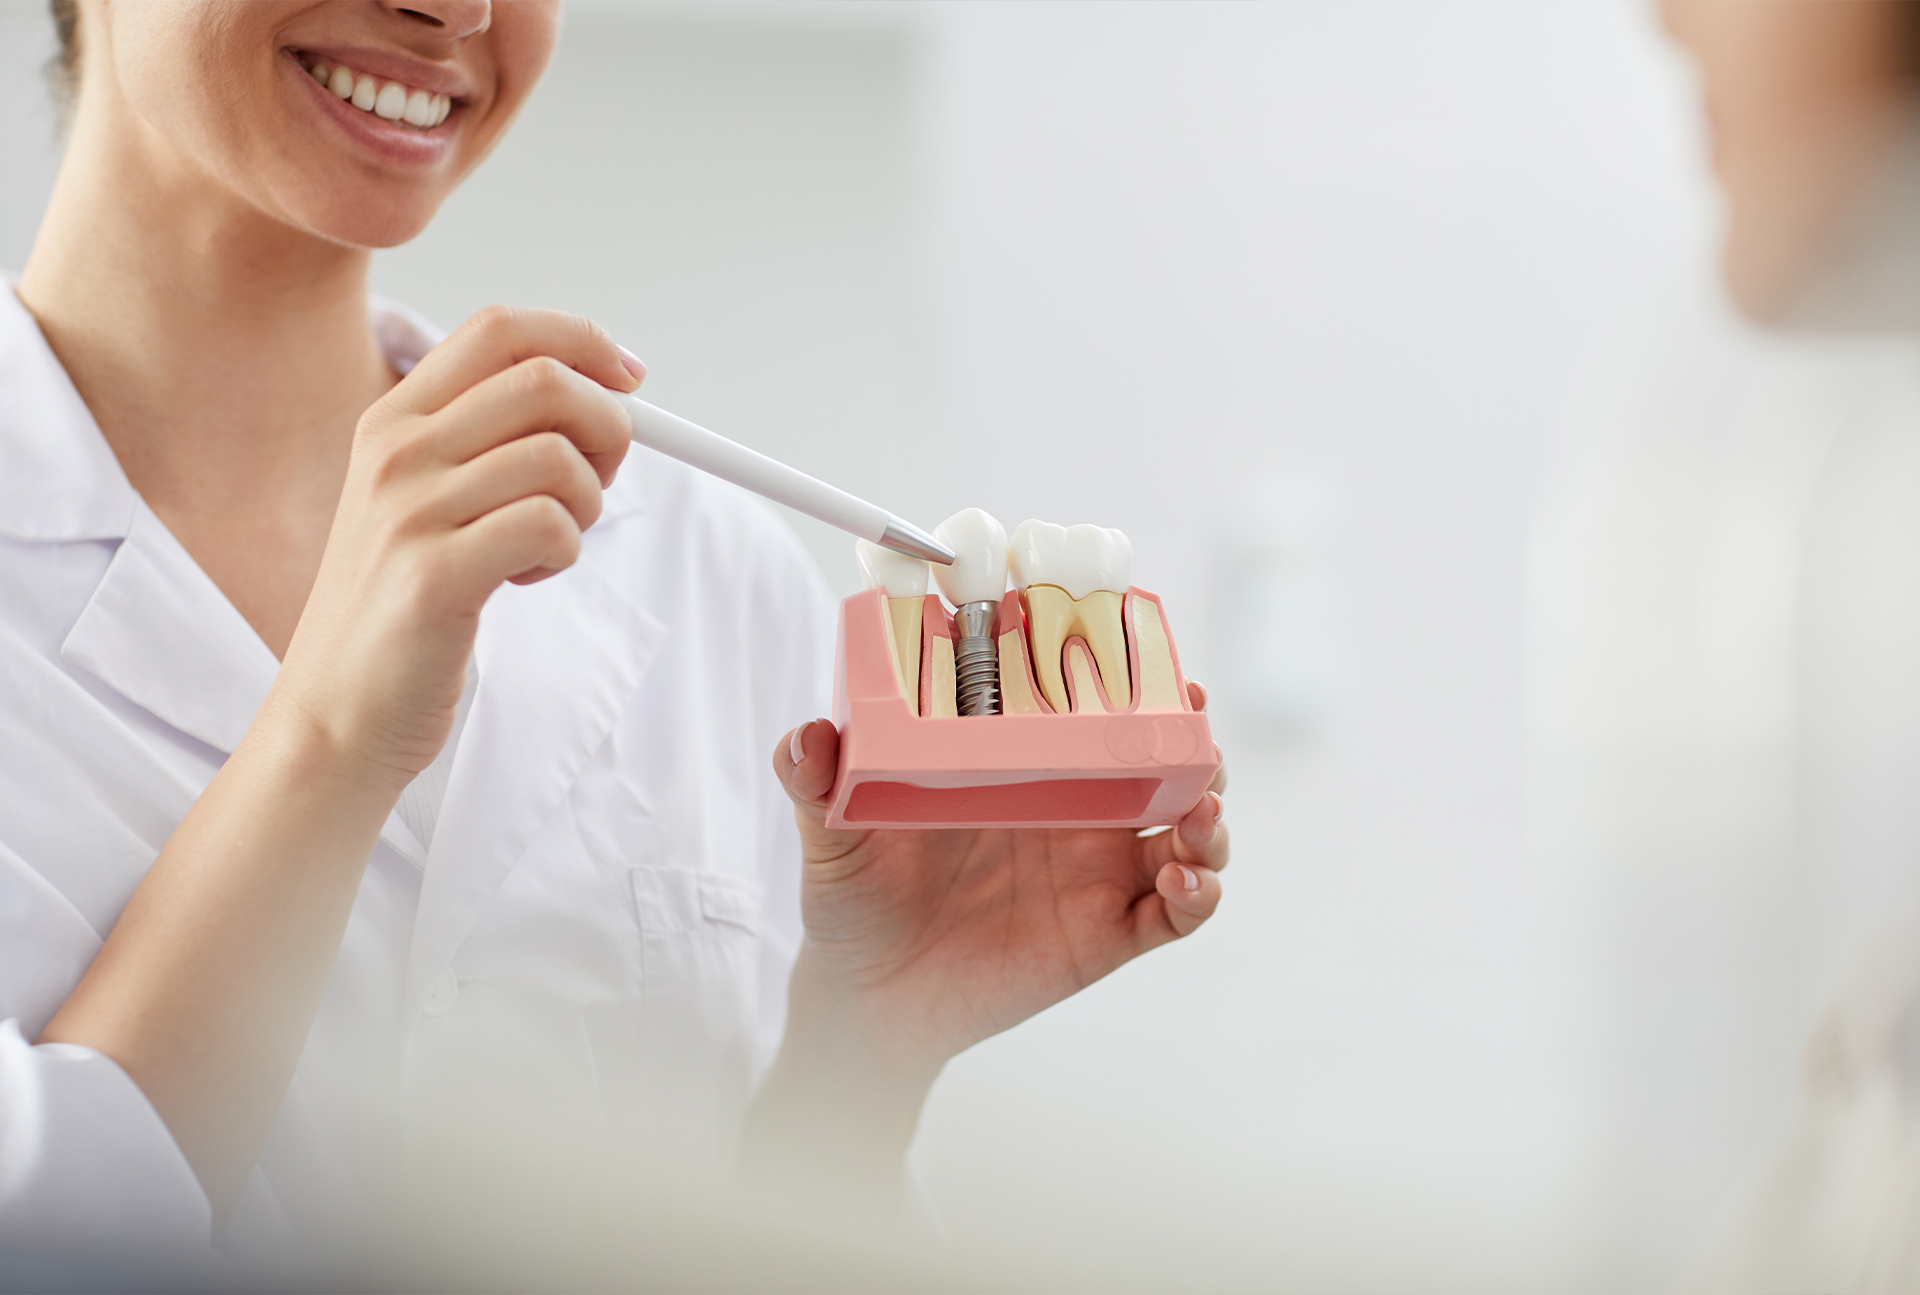 Consider Same Day Dental Implants at The Maxfac Clinic in South Mumbai